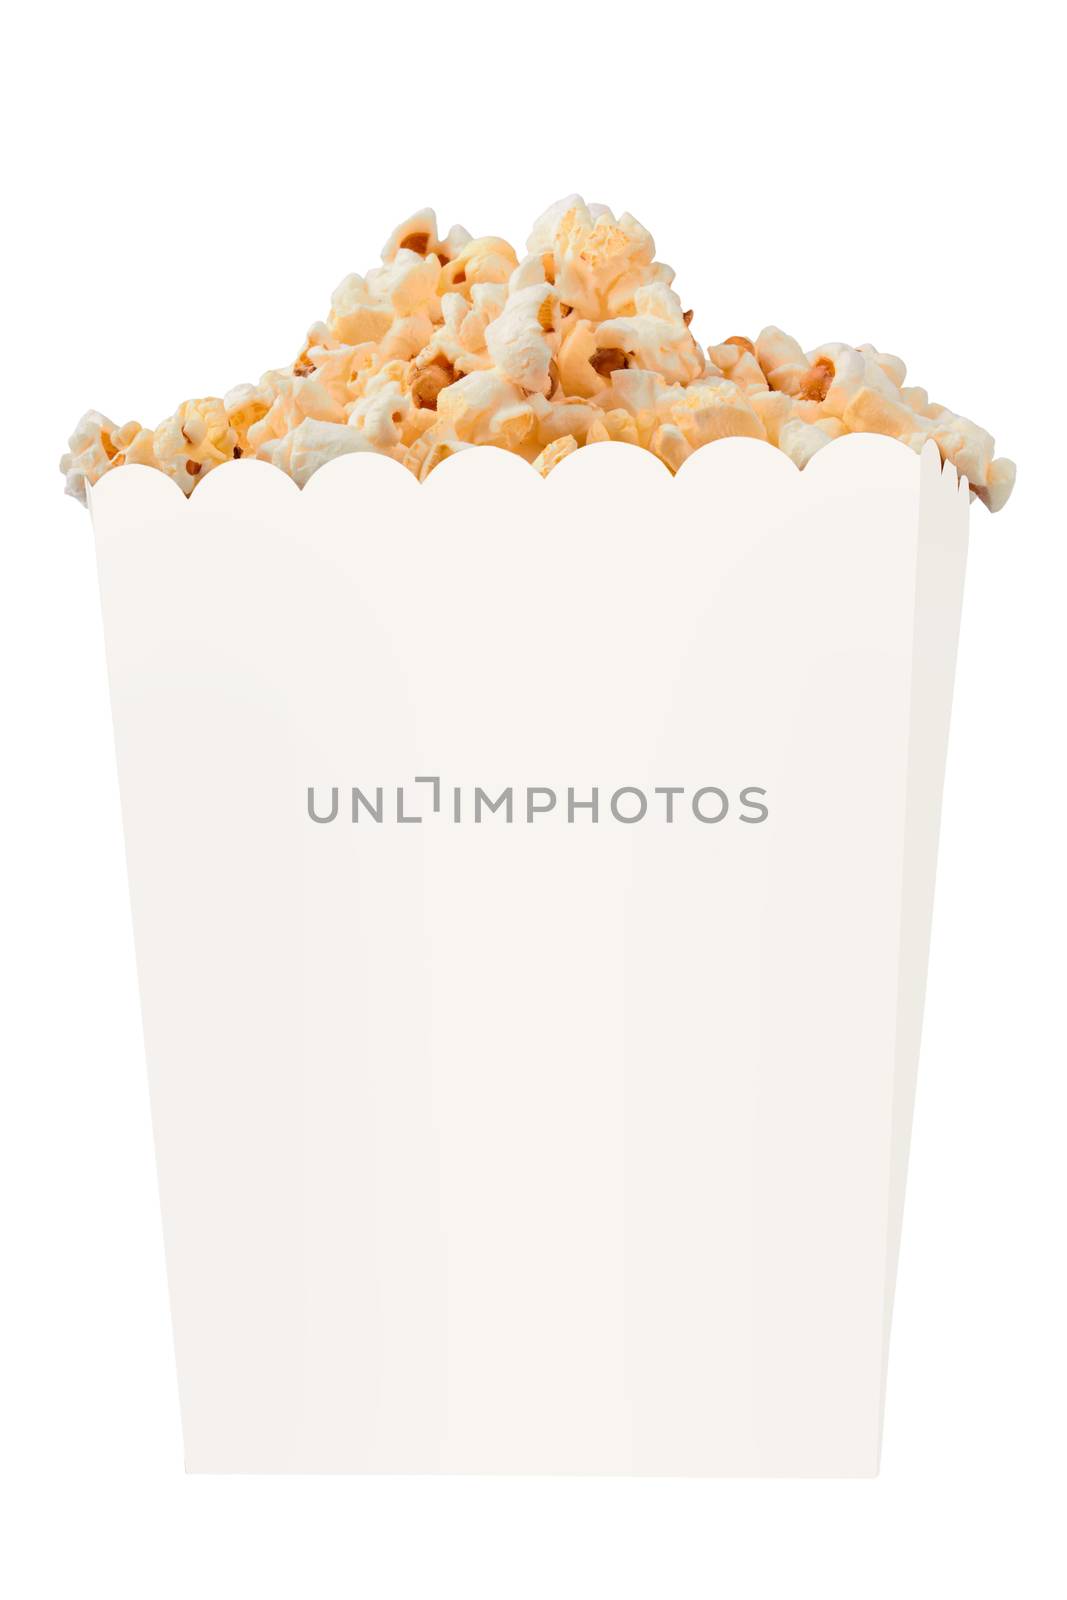 Popcorn in box isolated on white background 